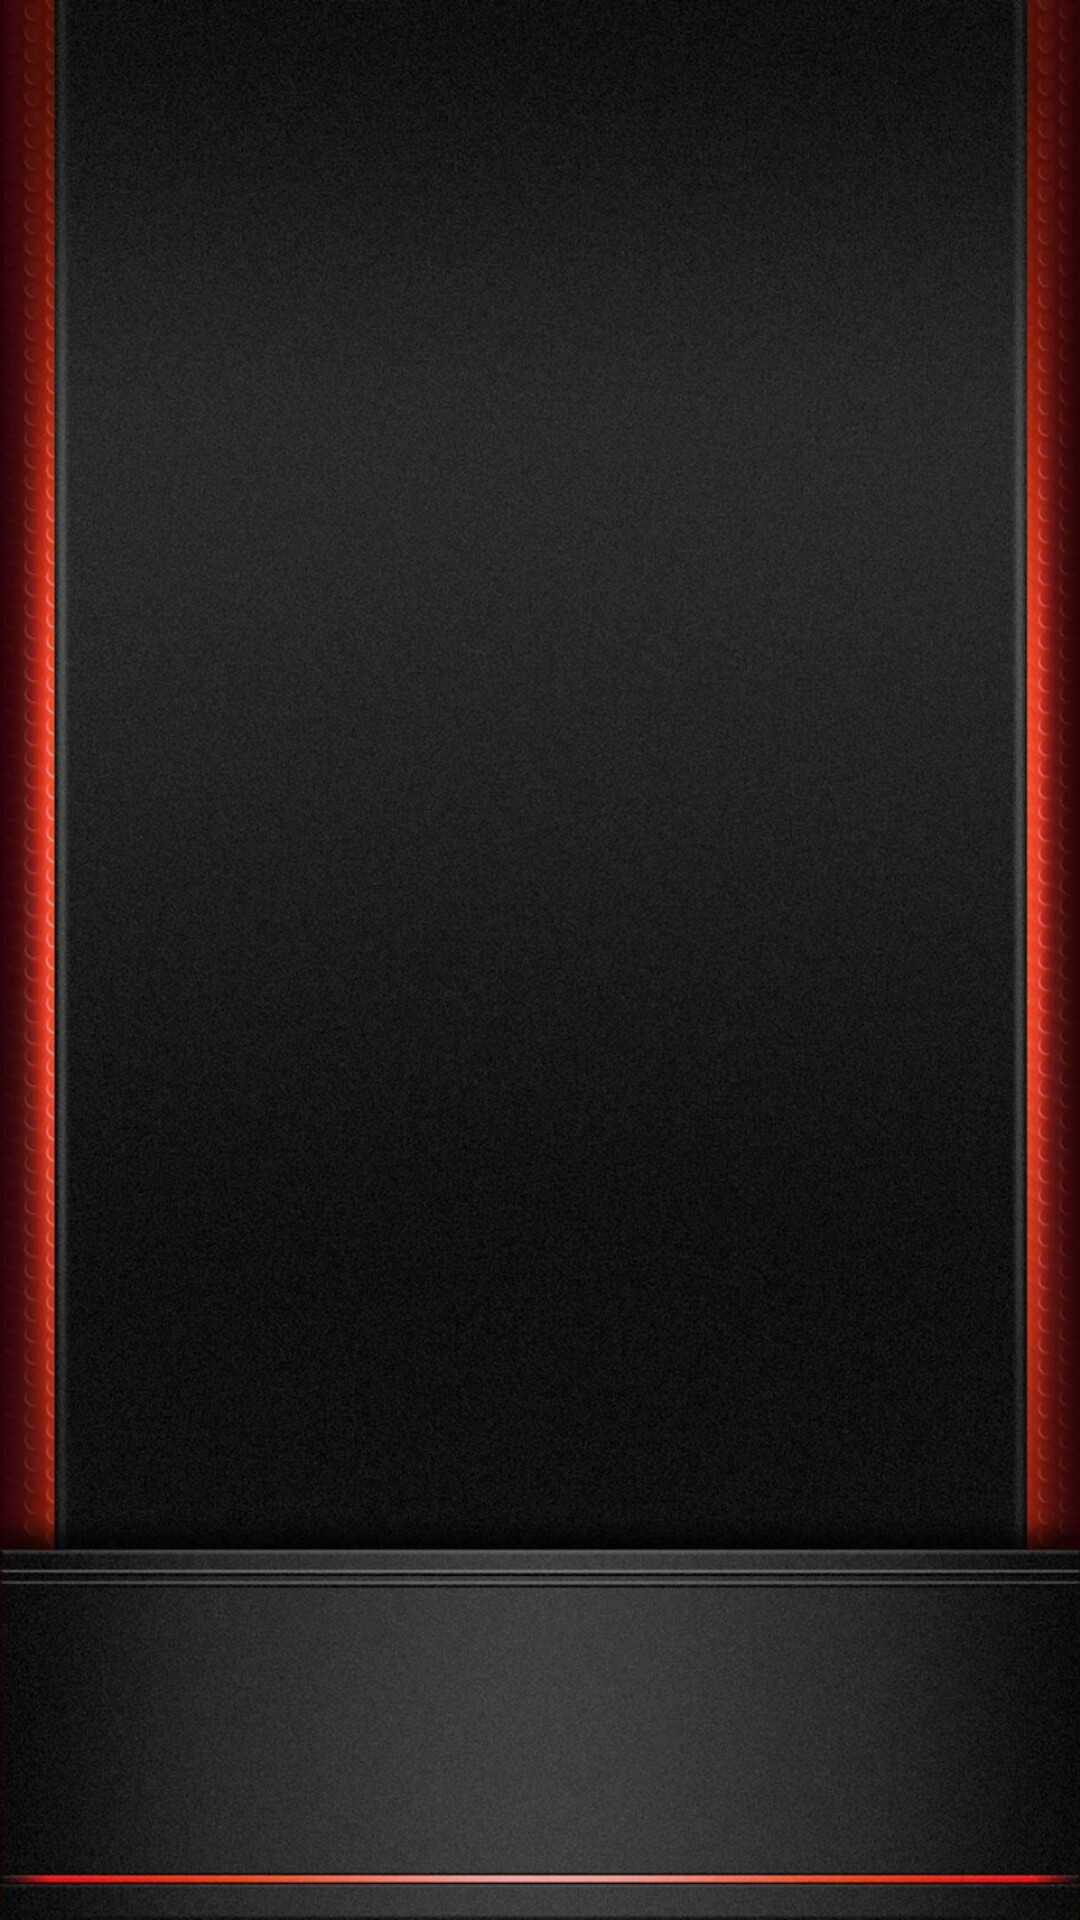 1080x1920 Black with Red Trim Wallpaper